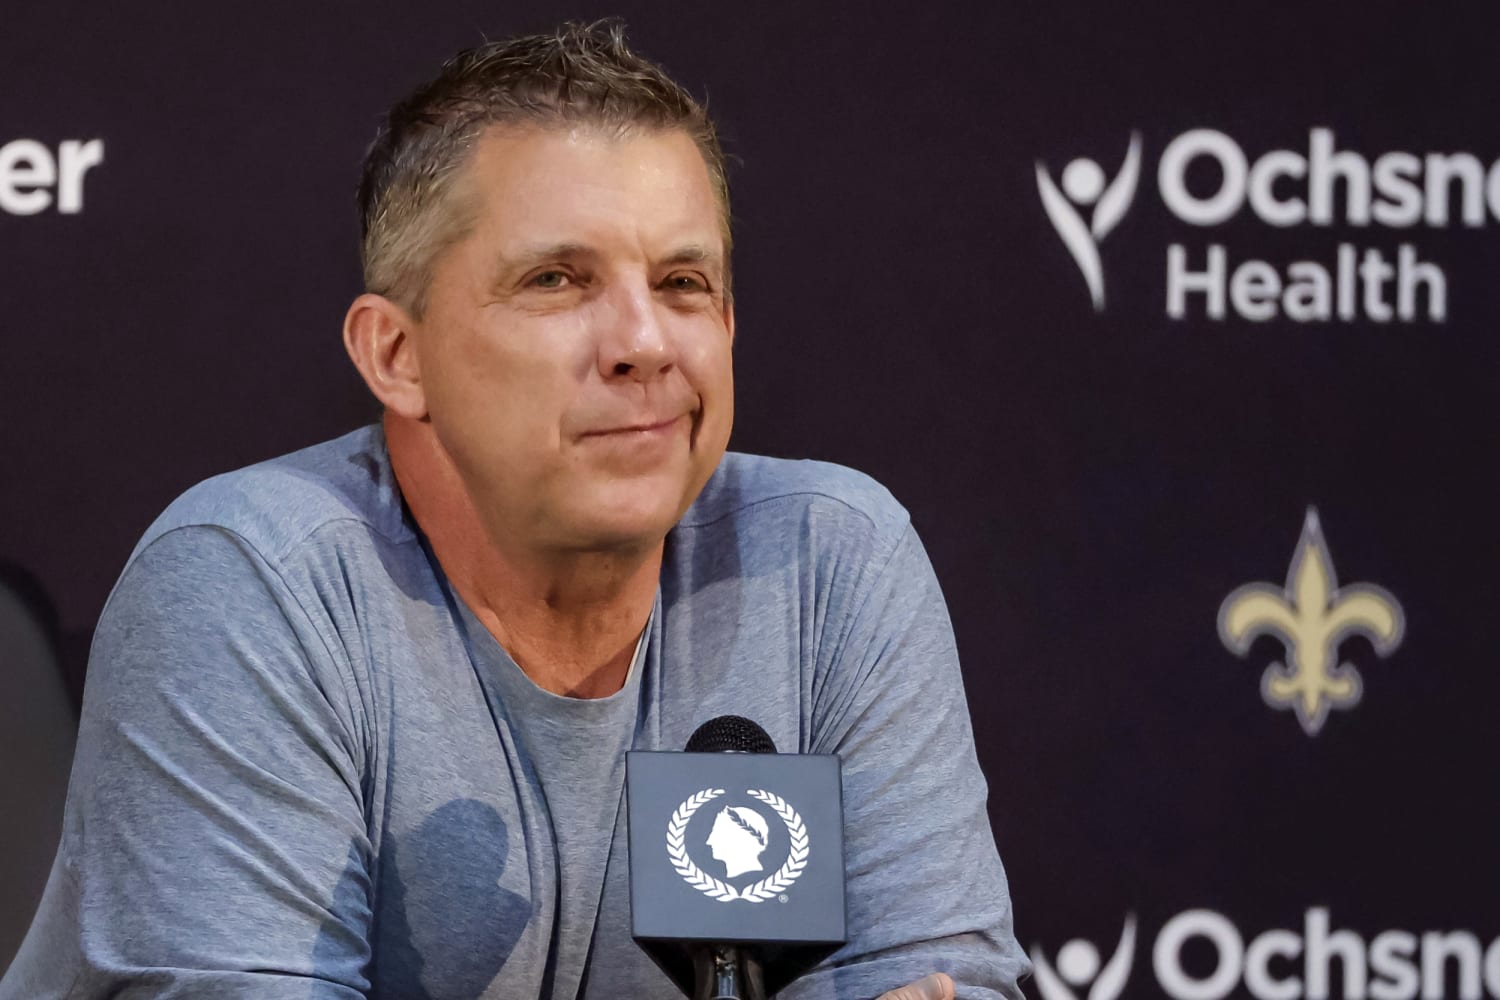 Sean Payton to step down as New Orleans Saints coach after 16 years